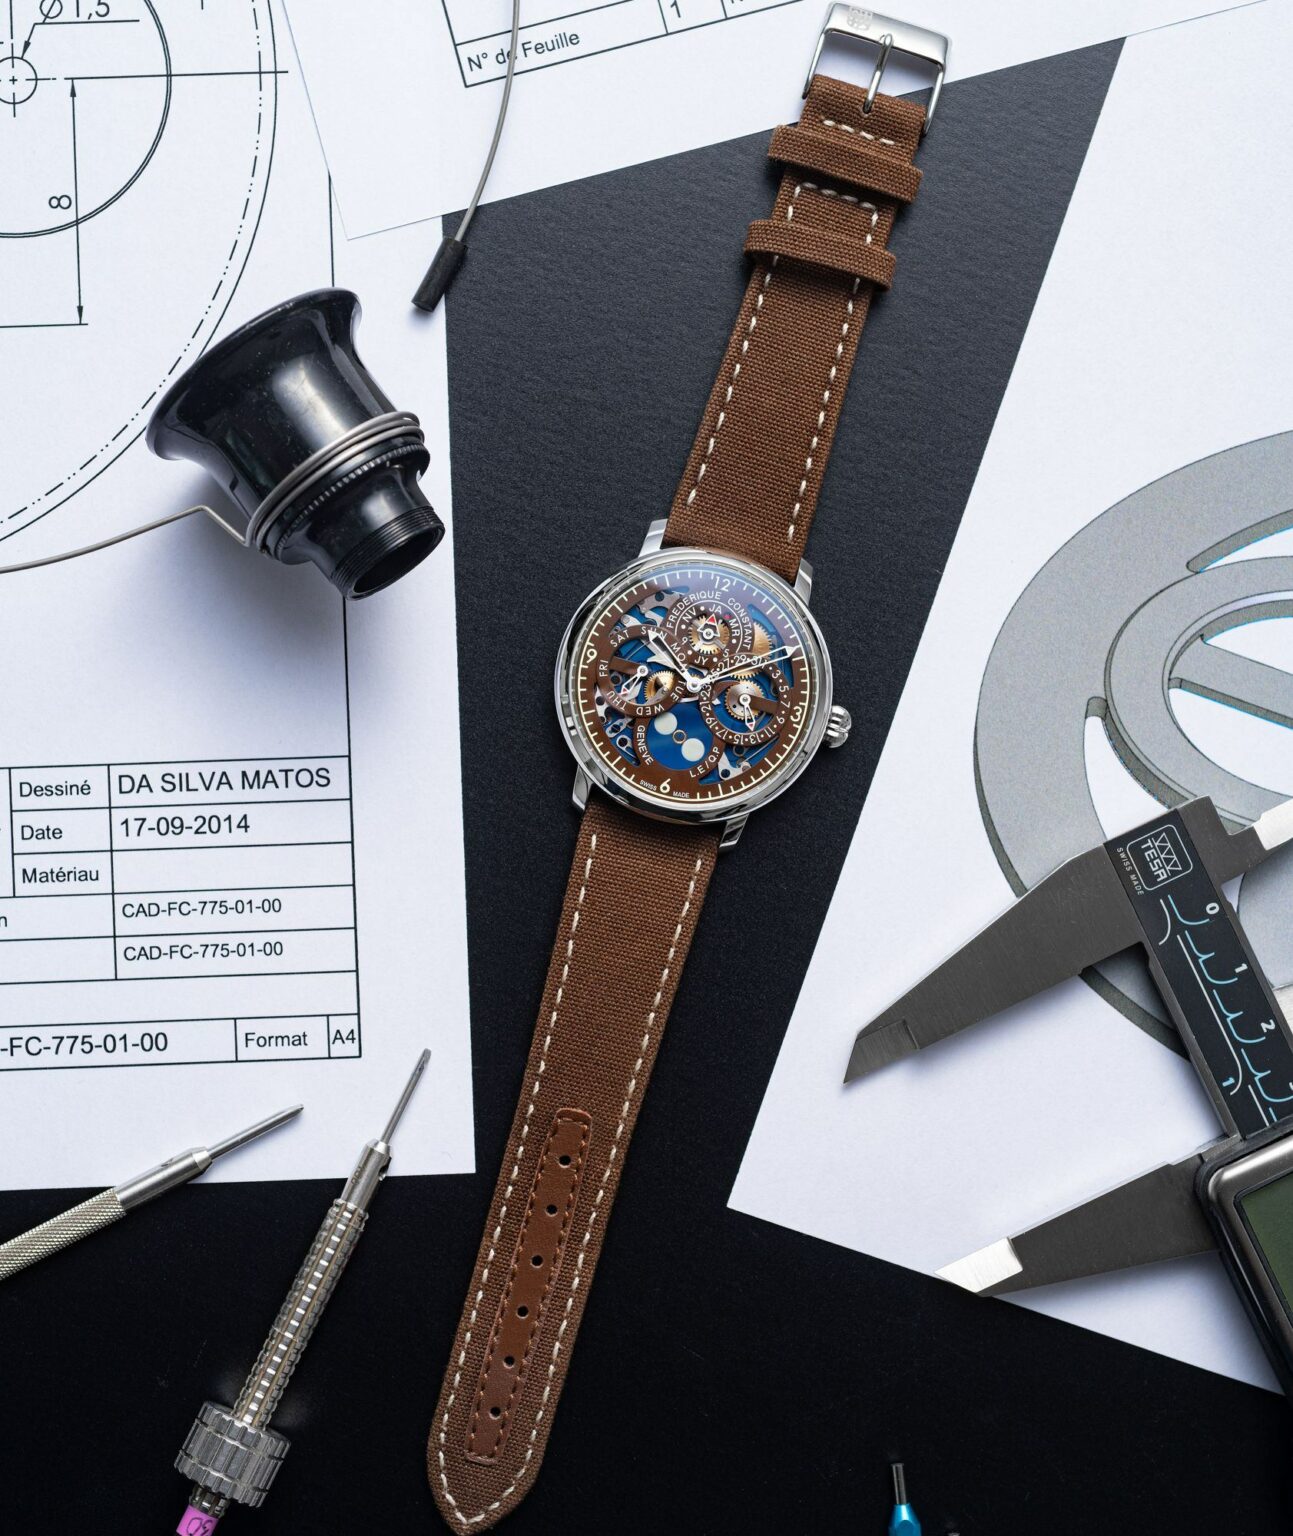 Frederique Constant Debuts The Naked Watchmaker Perpetual Calendar Manufacture Limited Edition